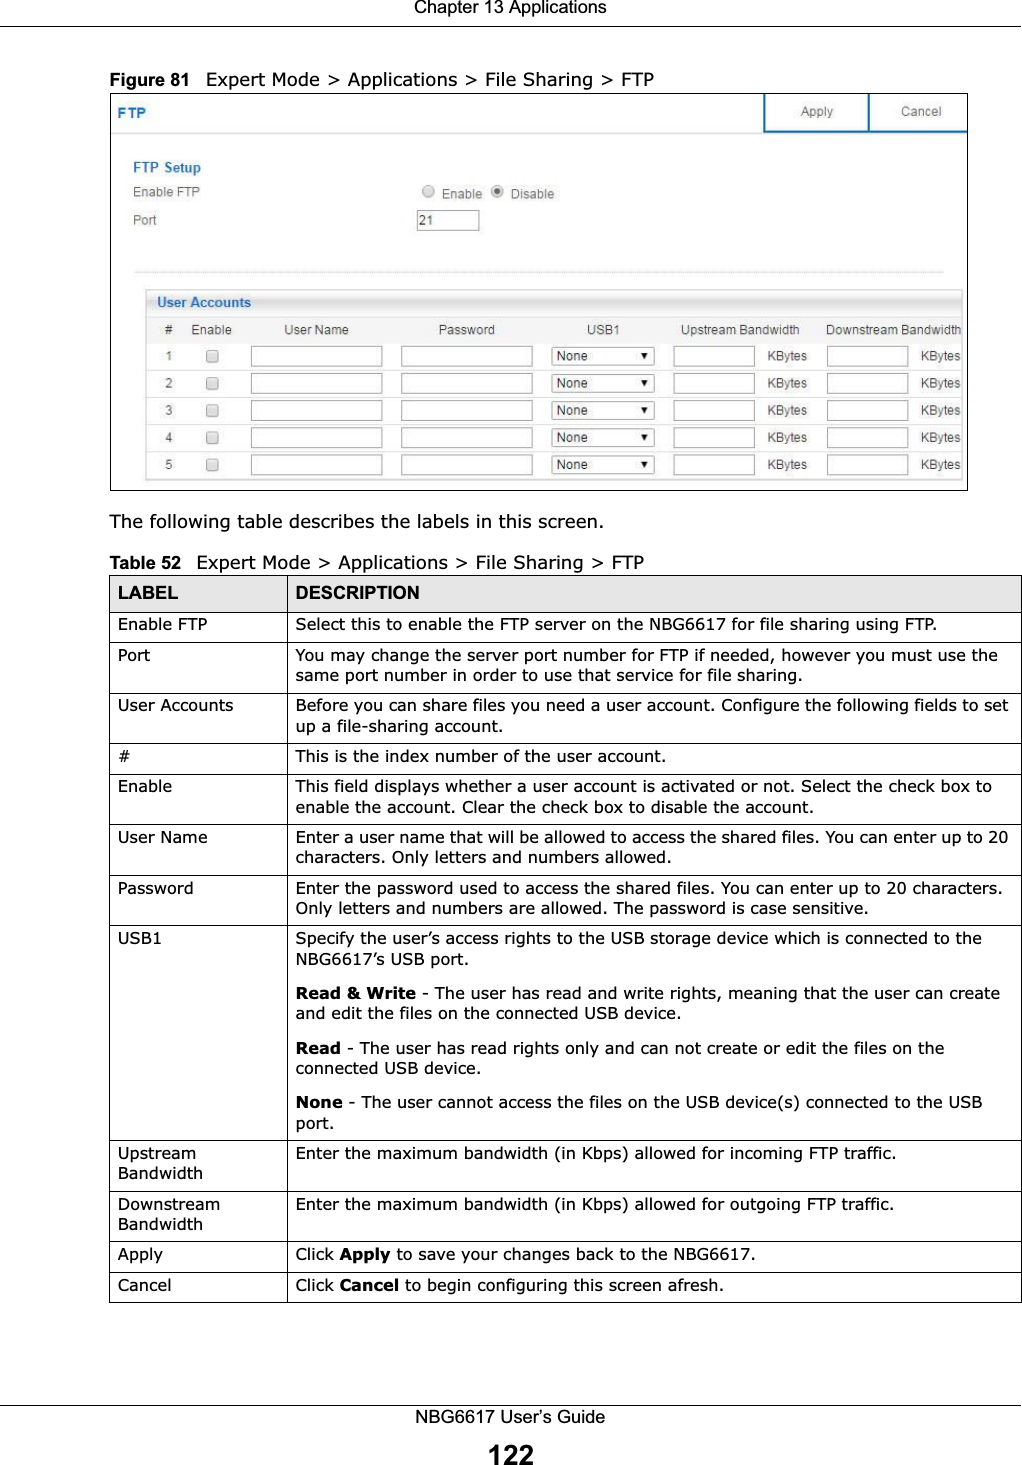 Chapter 13 ApplicationsNBG6617 User’s Guide122Figure 81   Expert Mode &gt; Applications &gt; File Sharing &gt; FTP  The following table describes the labels in this screen.Table 52   Expert Mode &gt; Applications &gt; File Sharing &gt; FTP LABEL DESCRIPTIONEnable FTP Select this to enable the FTP server on the NBG6617 for file sharing using FTP.Port You may change the server port number for FTP if needed, however you must use the same port number in order to use that service for file sharing.User Accounts Before you can share files you need a user account. Configure the following fields to set up a file-sharing account. #This is the index number of the user account.Enable This field displays whether a user account is activated or not. Select the check box to enable the account. Clear the check box to disable the account.User Name Enter a user name that will be allowed to access the shared files. You can enter up to 20 characters. Only letters and numbers allowed.Password Enter the password used to access the shared files. You can enter up to 20 characters. Only letters and numbers are allowed. The password is case sensitive.USB1 Specify the user’s access rights to the USB storage device which is connected to the NBG6617’s USB port.Read &amp; Write - The user has read and write rights, meaning that the user can create and edit the files on the connected USB device.Read - The user has read rights only and can not create or edit the files on the connected USB device.None - The user cannot access the files on the USB device(s) connected to the USB port.Upstream BandwidthEnter the maximum bandwidth (in Kbps) allowed for incoming FTP traffic.Downstream BandwidthEnter the maximum bandwidth (in Kbps) allowed for outgoing FTP traffic.Apply Click Apply to save your changes back to the NBG6617.Cancel Click Cancel to begin configuring this screen afresh.